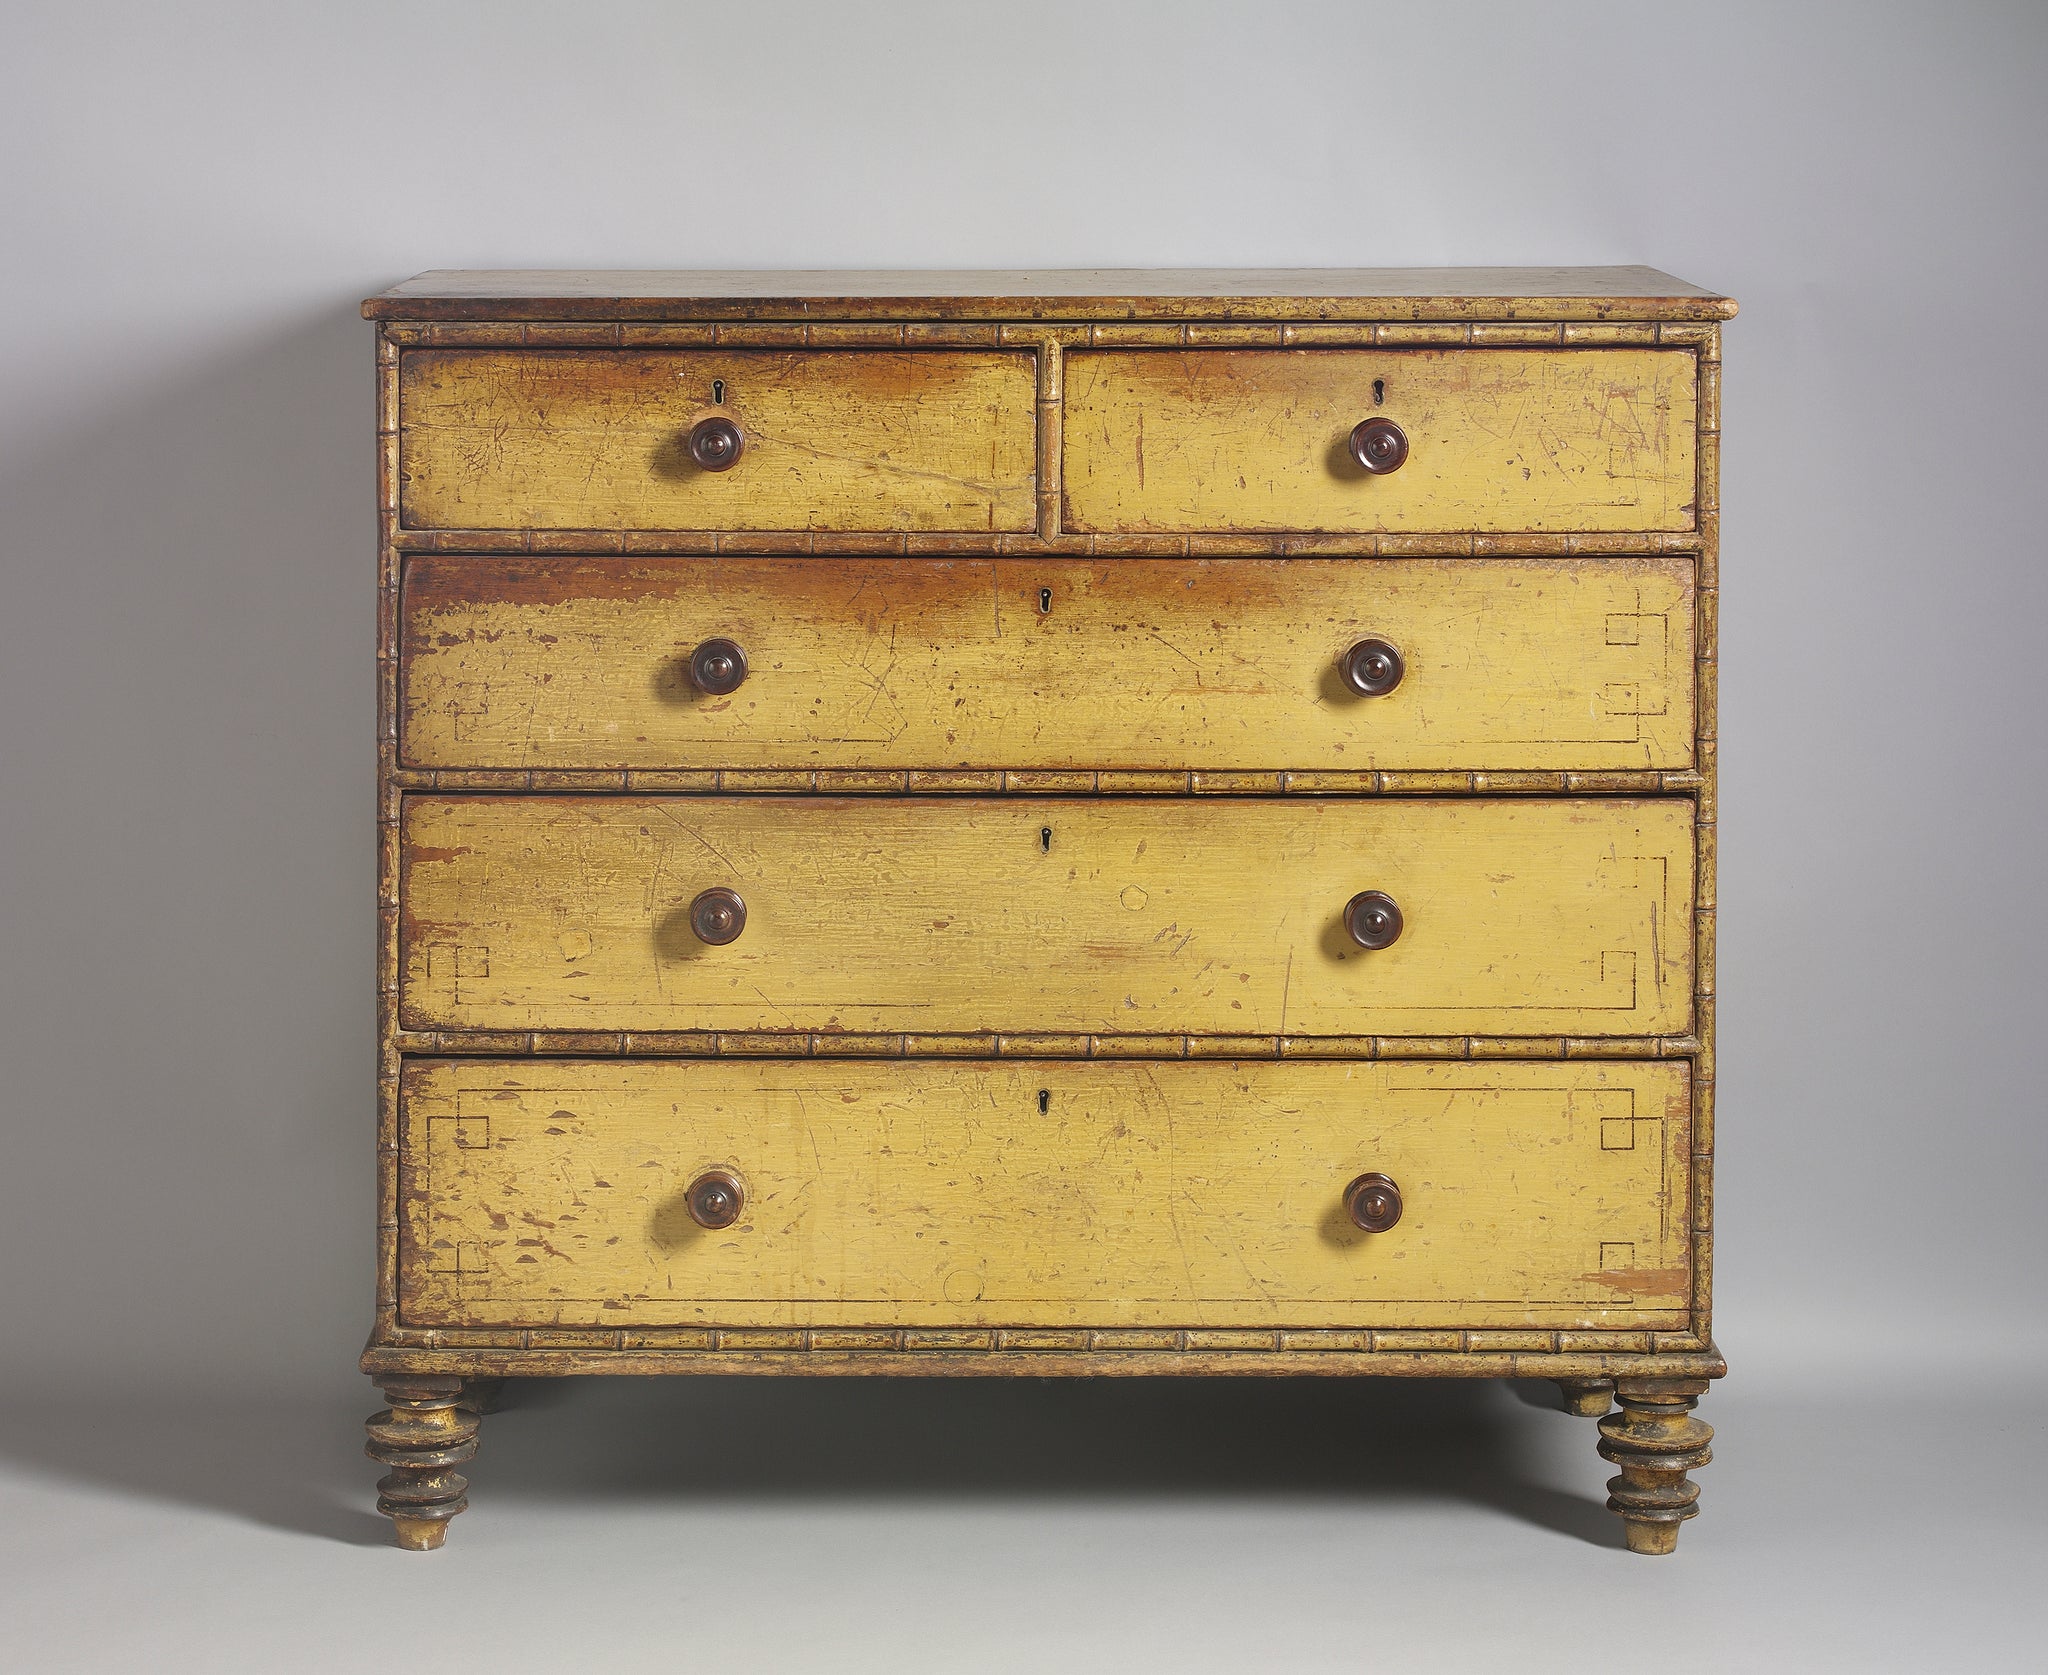 Regency Period Decorated Chest of Drawers